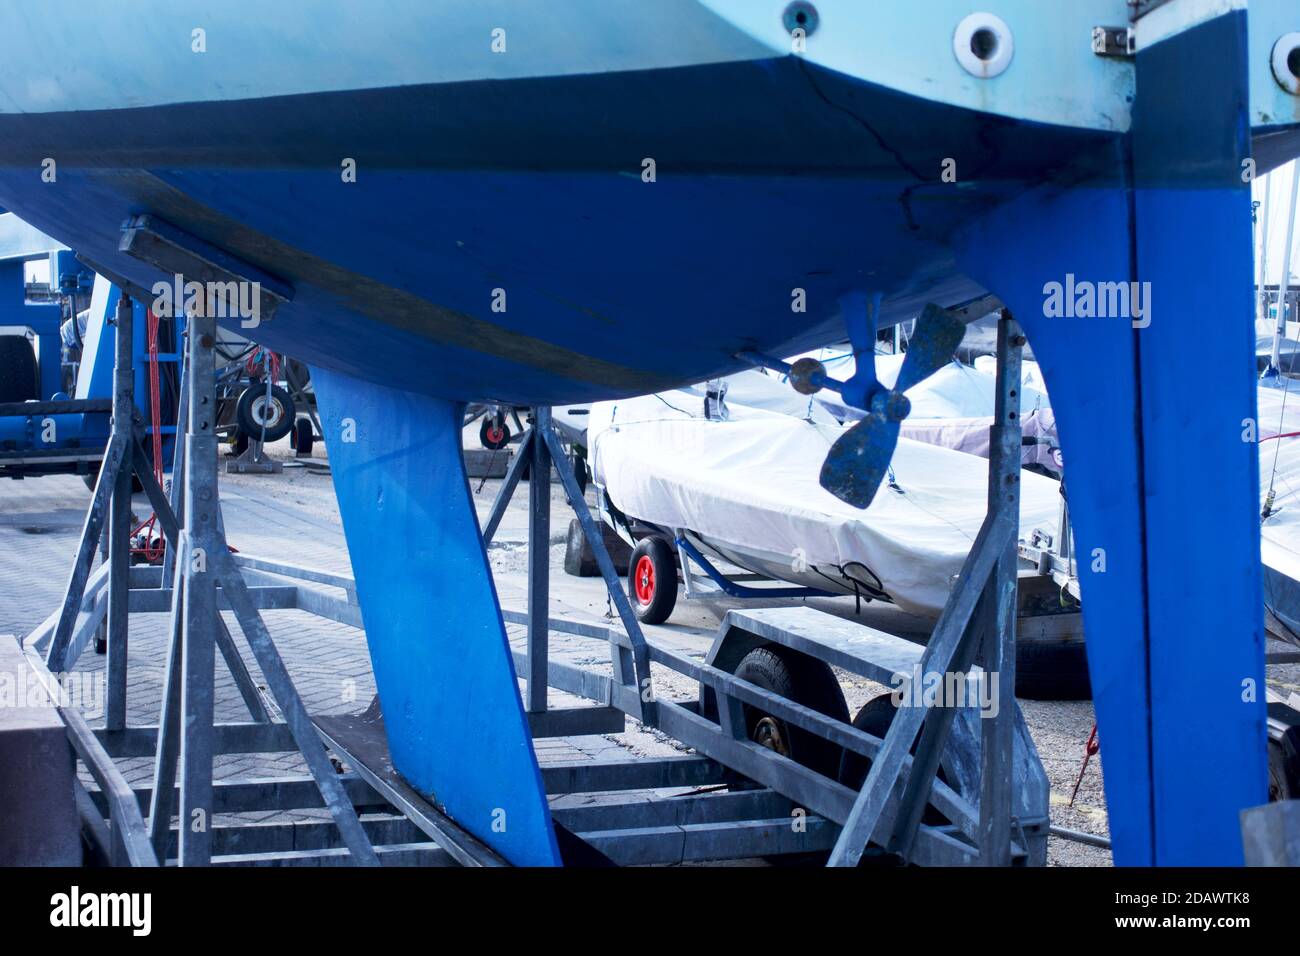 A sailing yacht or boat on the hard in a boatyard, with hull showing a blue coloured anti-fouling layer to slow the growth of subaquatic organisms. Stock Photo